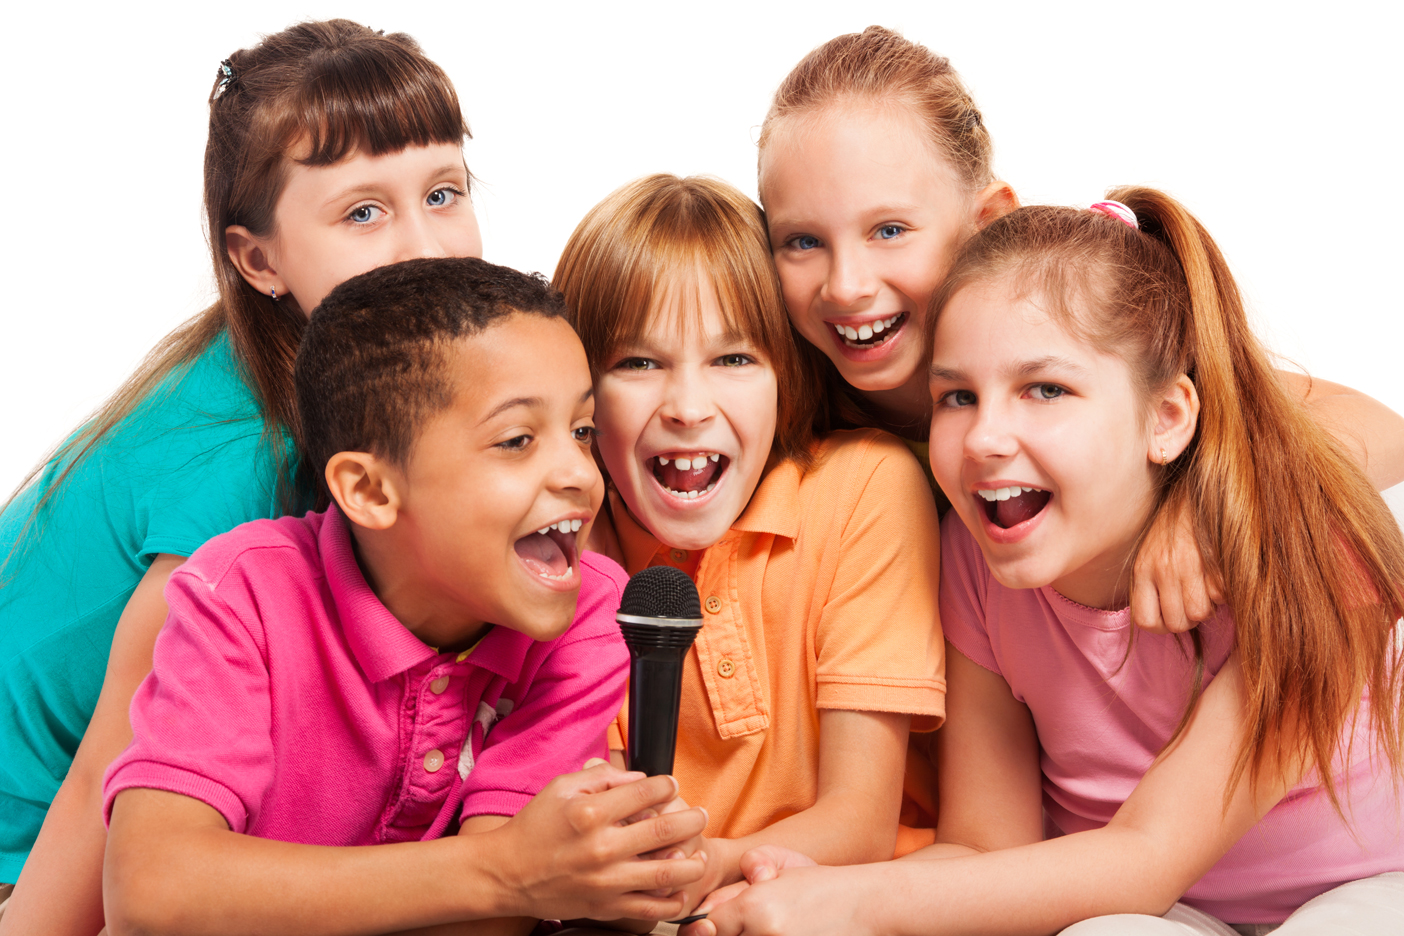 A Group of Children Singing Karaoke at a Party